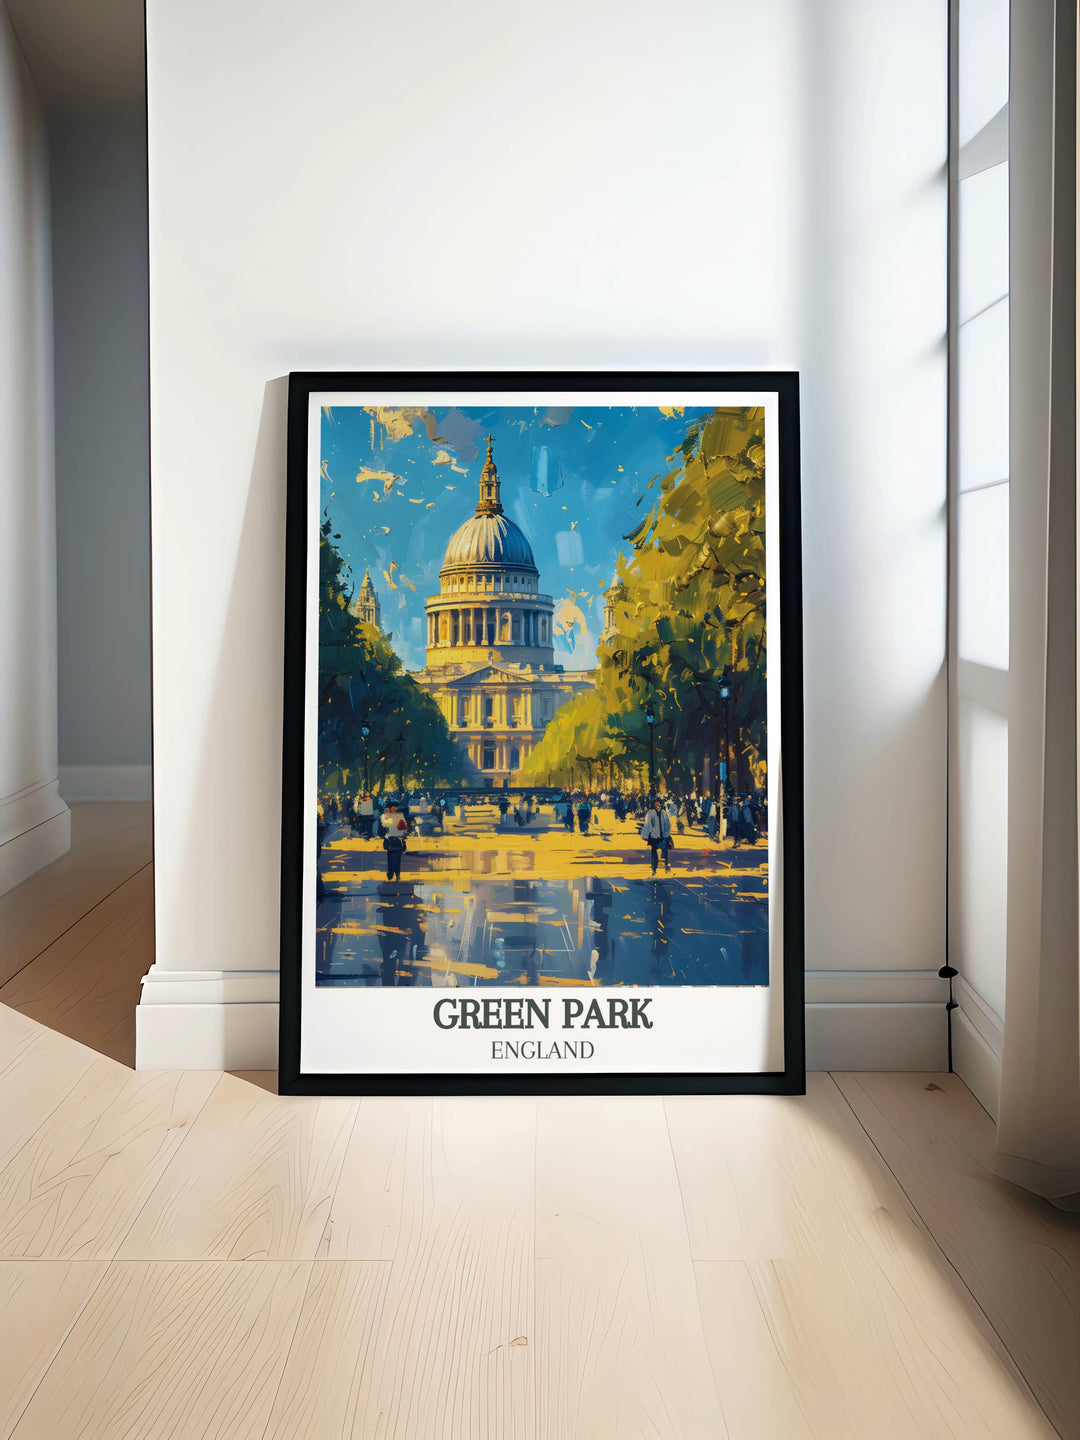 Green Park London poster featuring a serene landscape with Buckingham Palace in the background and Constitution Hill running alongside the park perfect for London wall art and travel enthusiasts seeking unique and elegant prints for home decor.